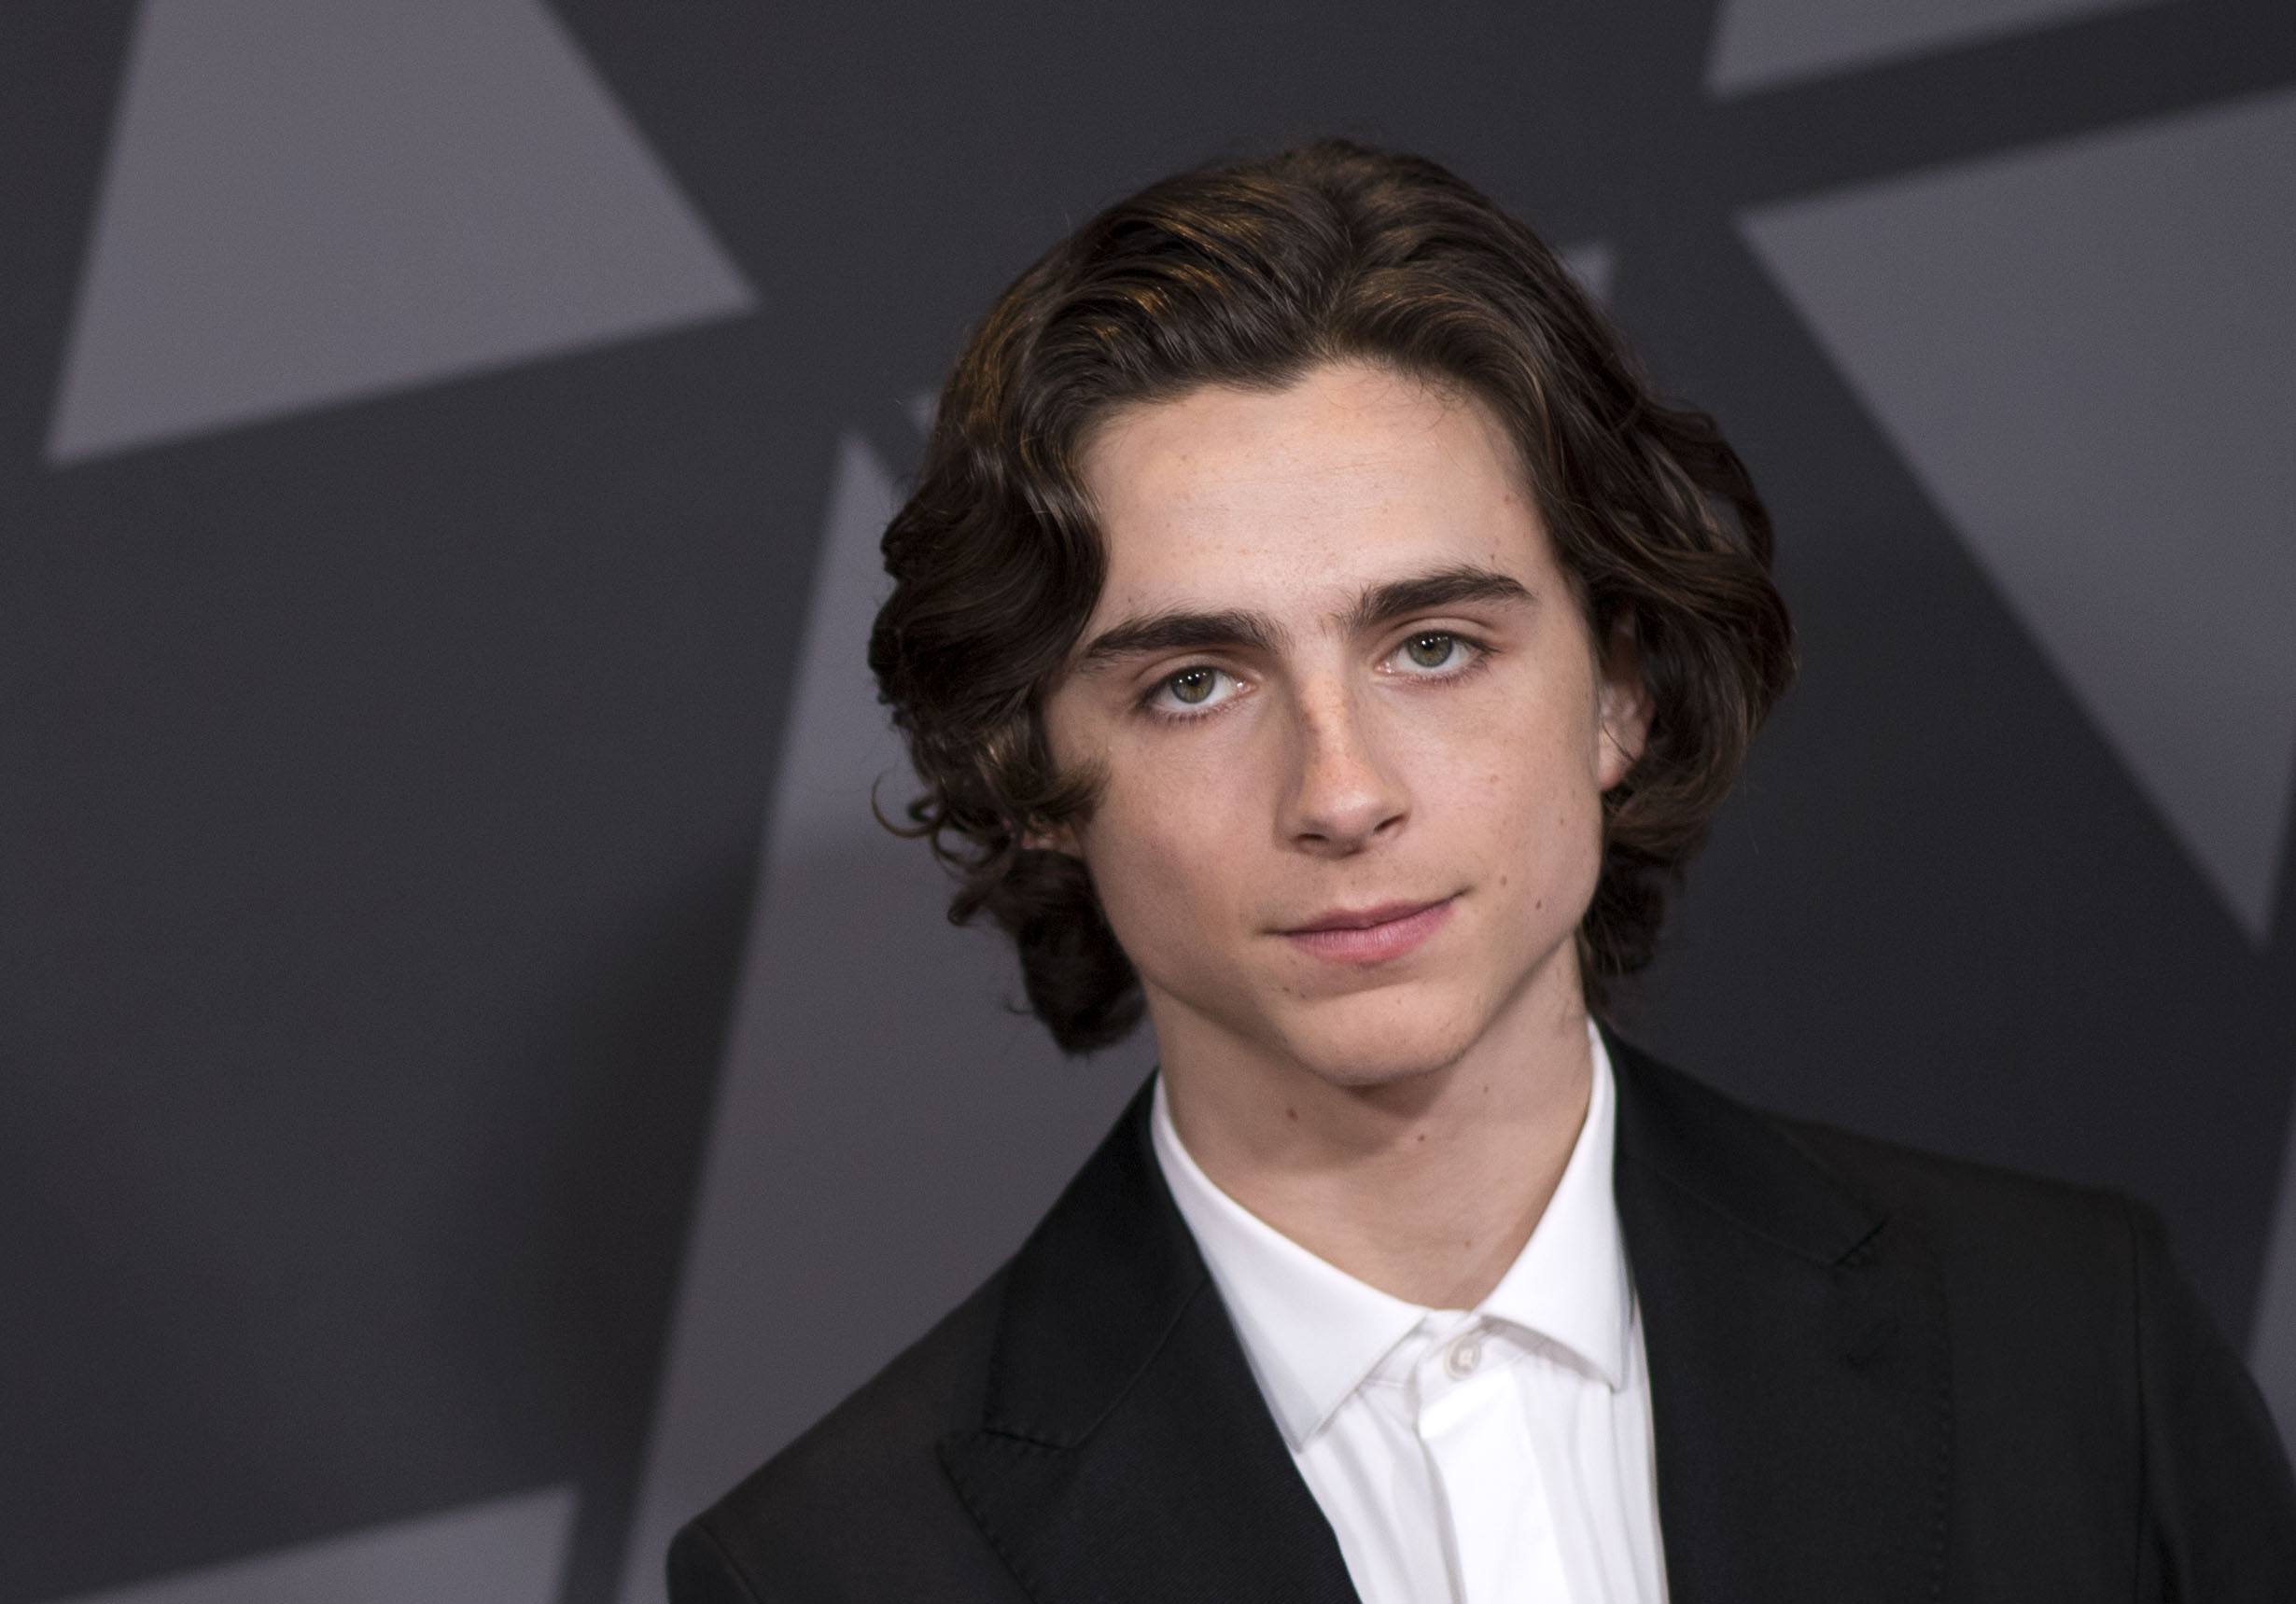 Timothee Chalamet attends the 2017 Governors Awards